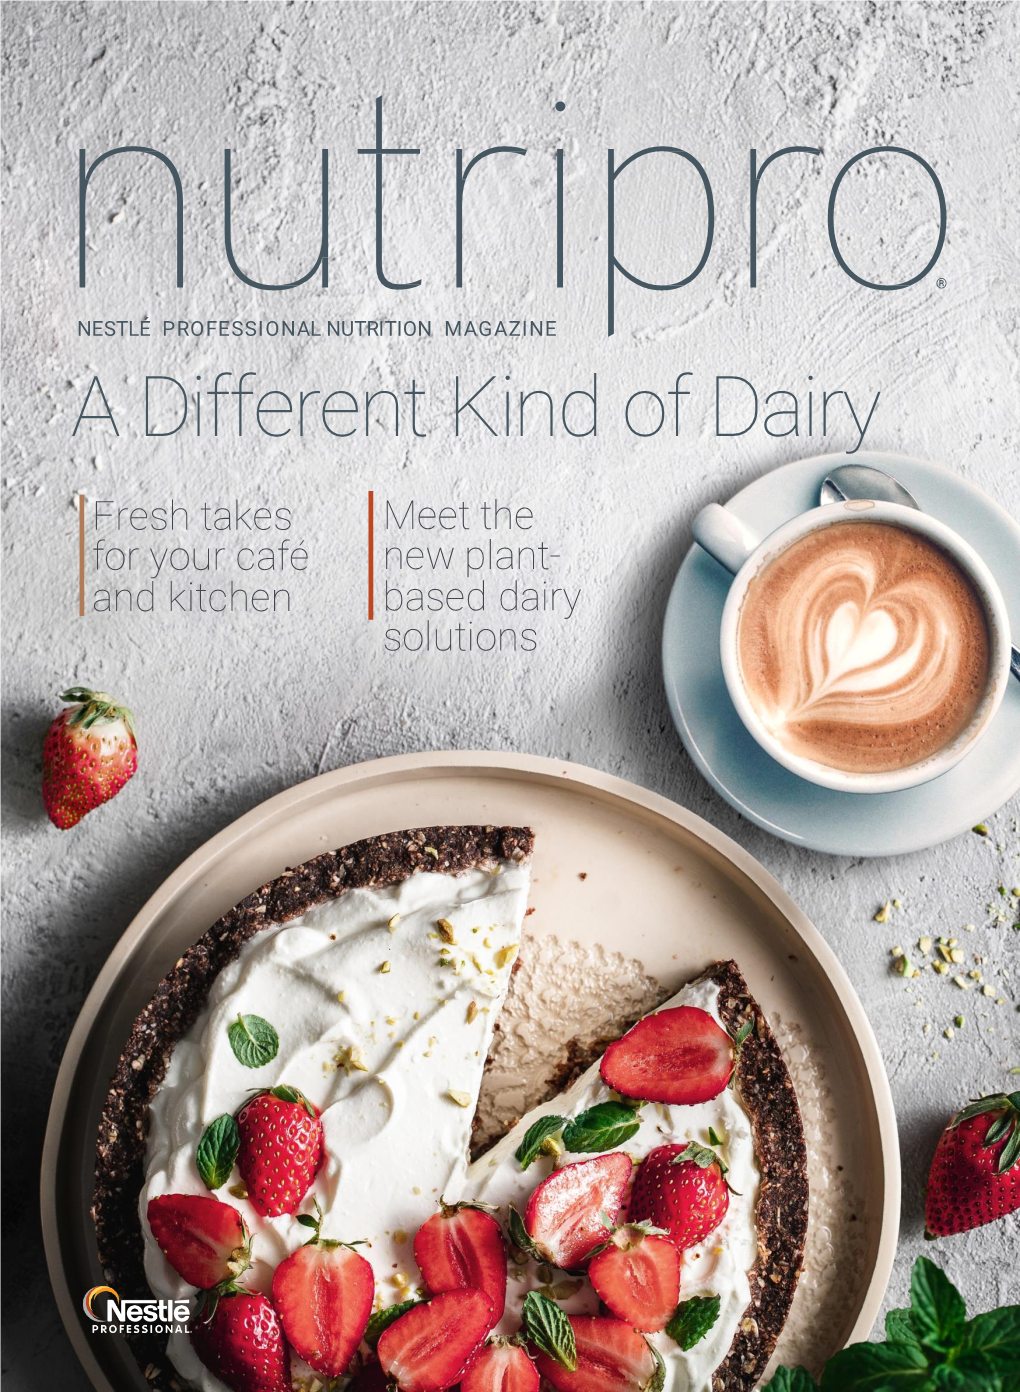 Nutripro Magazine: a Different Kind of Dairy